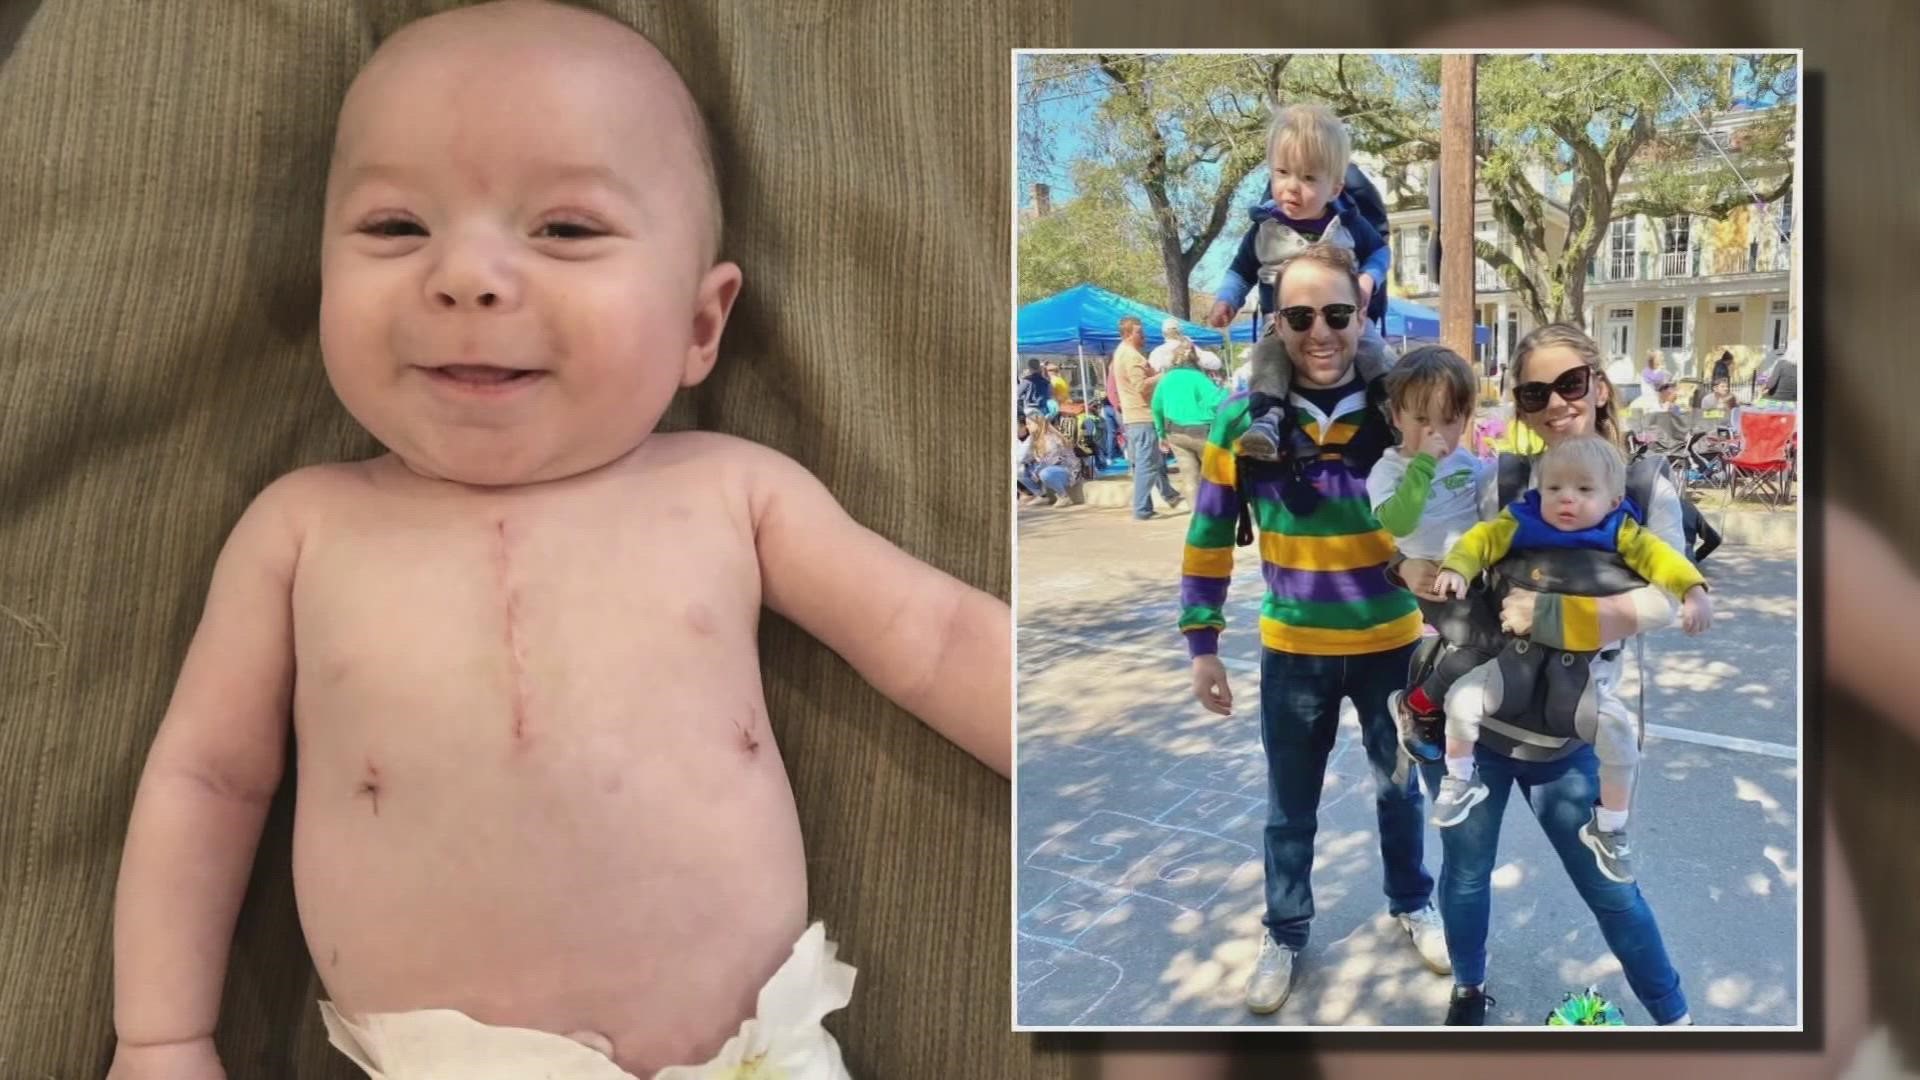 3-year-old Beau Alread is a Mardi Gras miracle being born prematurely with a hole in his heart. He is now a happy toddler with lots of energy.